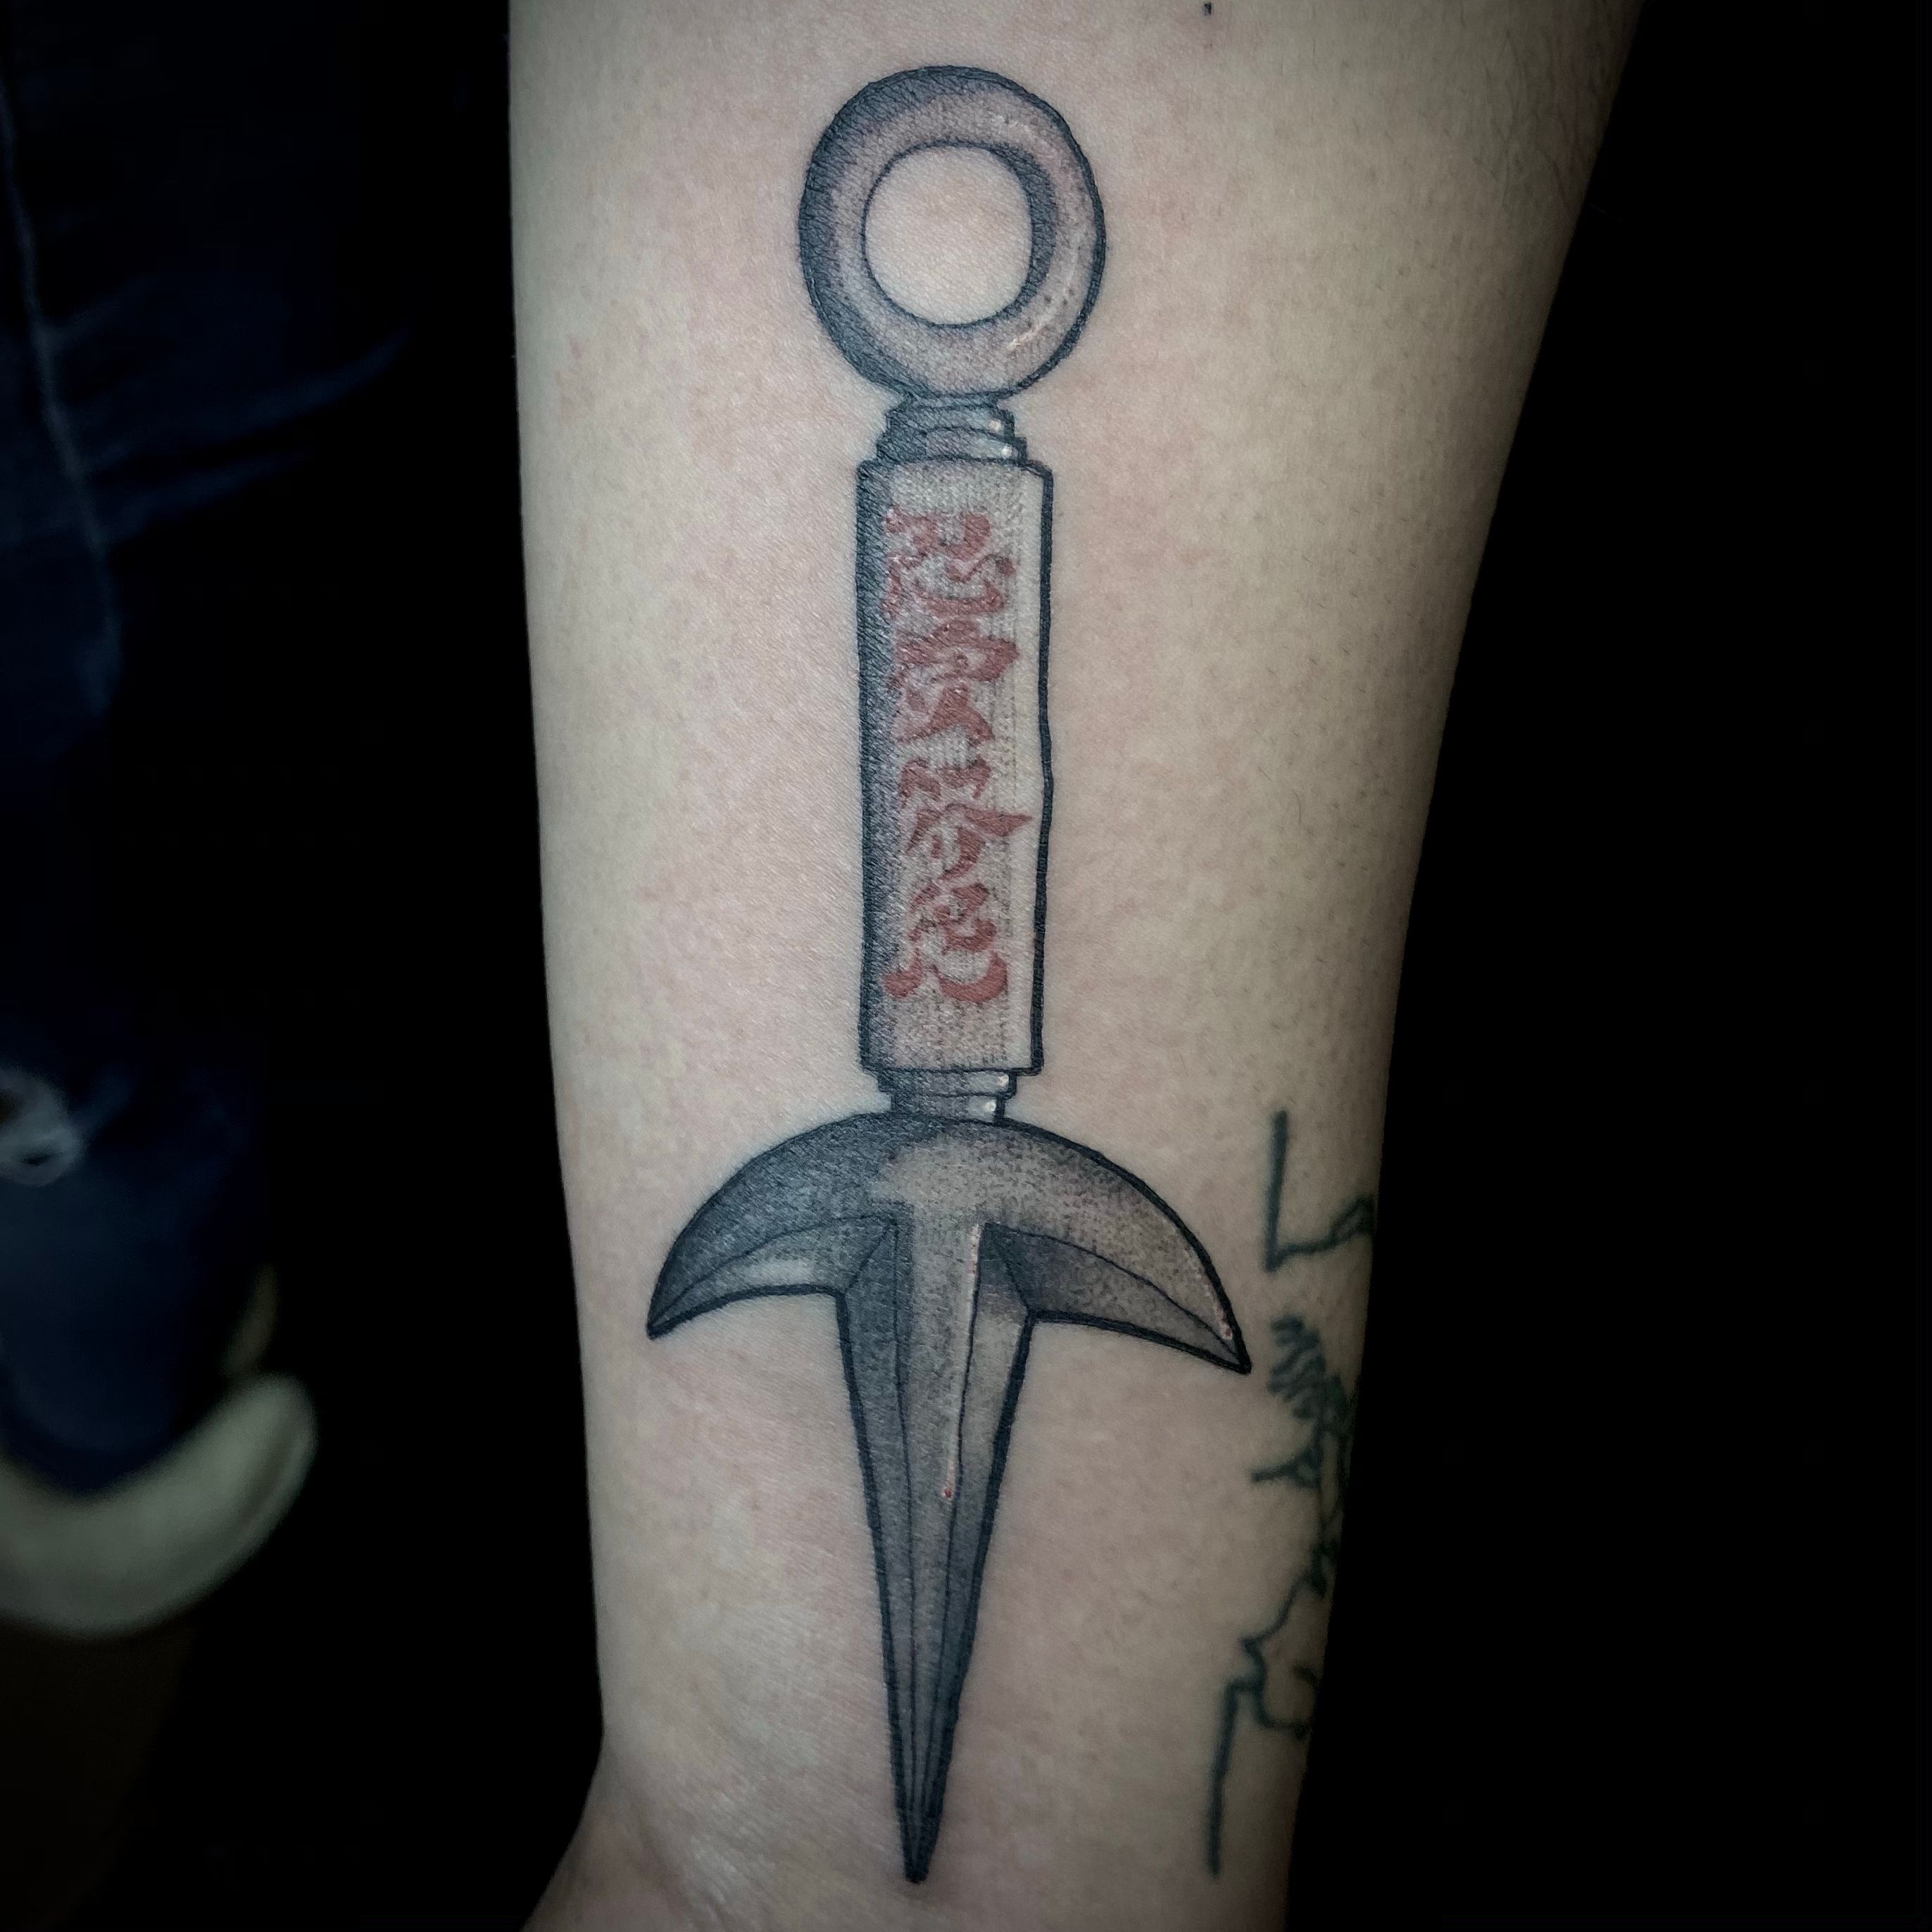 Kunai knife and shuriken Tattoo Get customized designs as a tattoo To  book appointments call 9076323059    Naruto tattoo Anime tattoos Cool  forearm tattoos